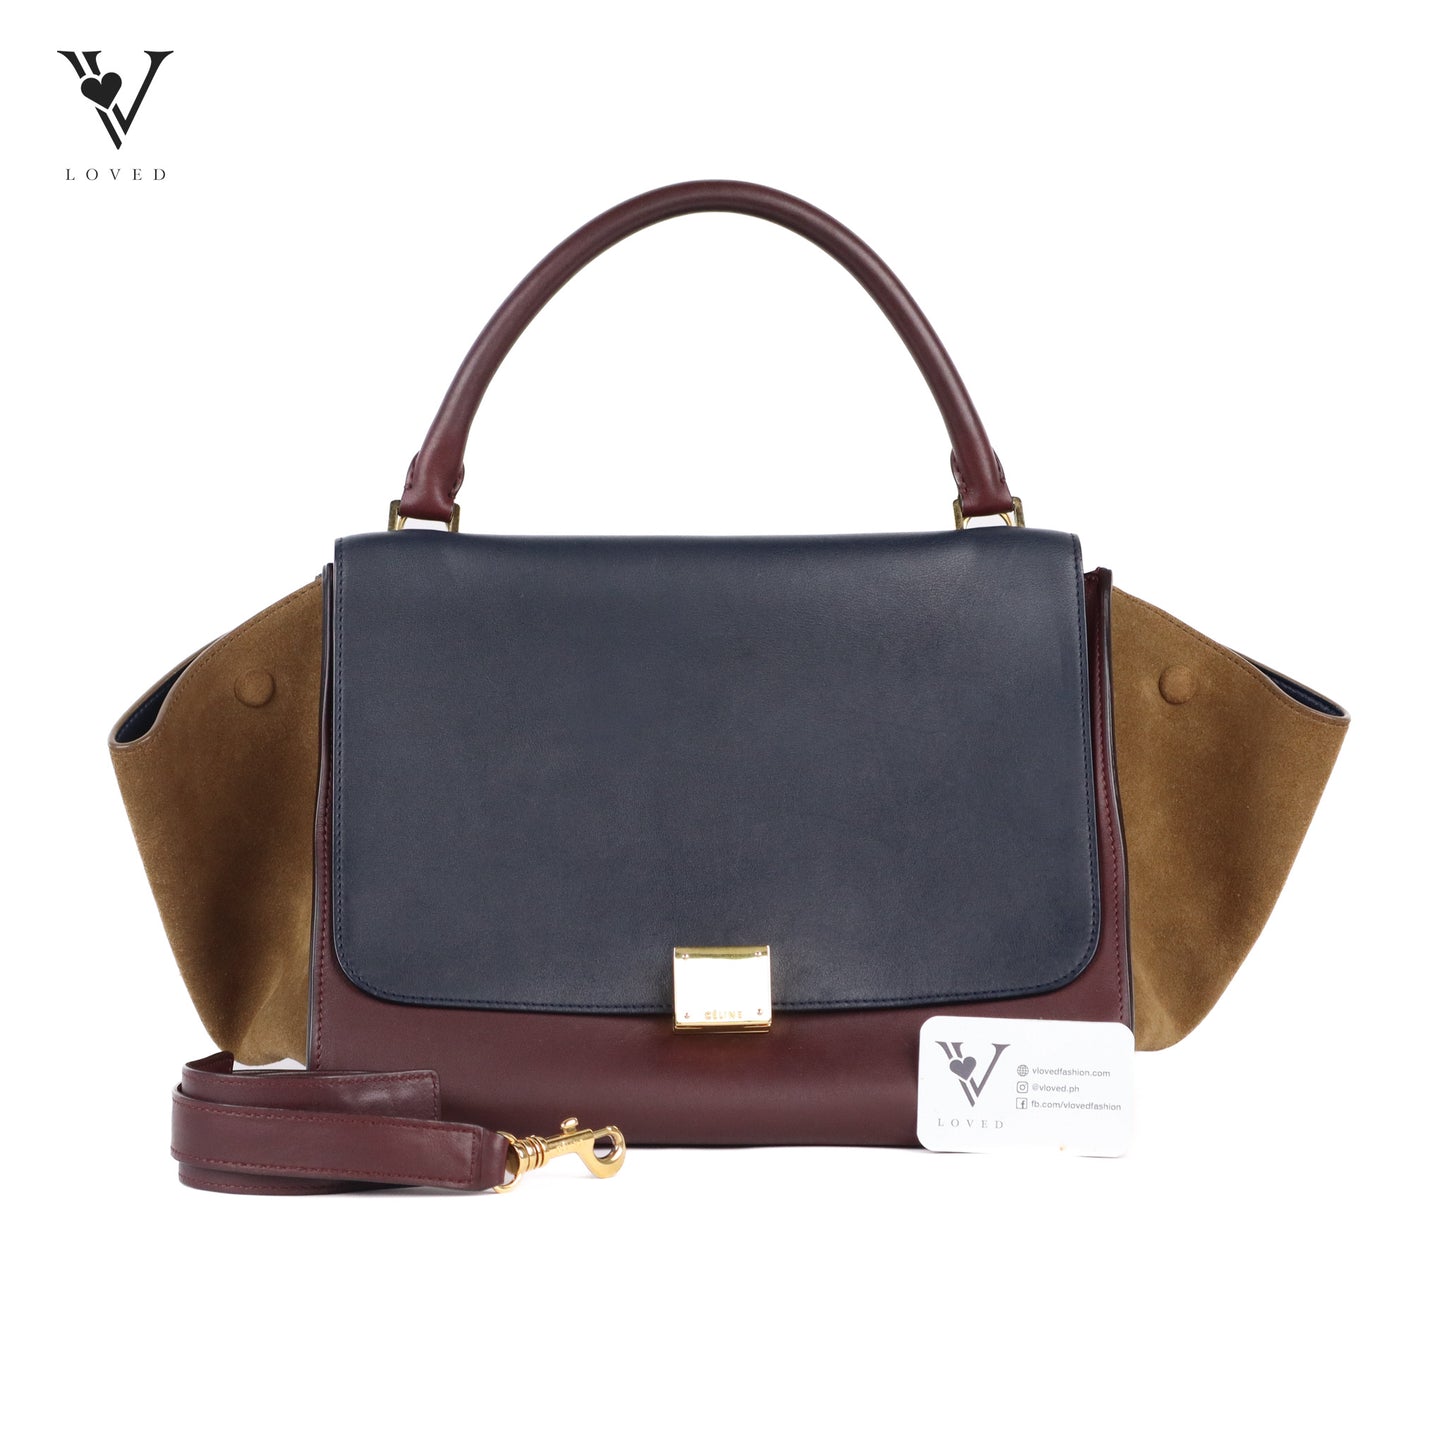 Trapeze in Smooth Calfskin and Suede Tricolor Bag